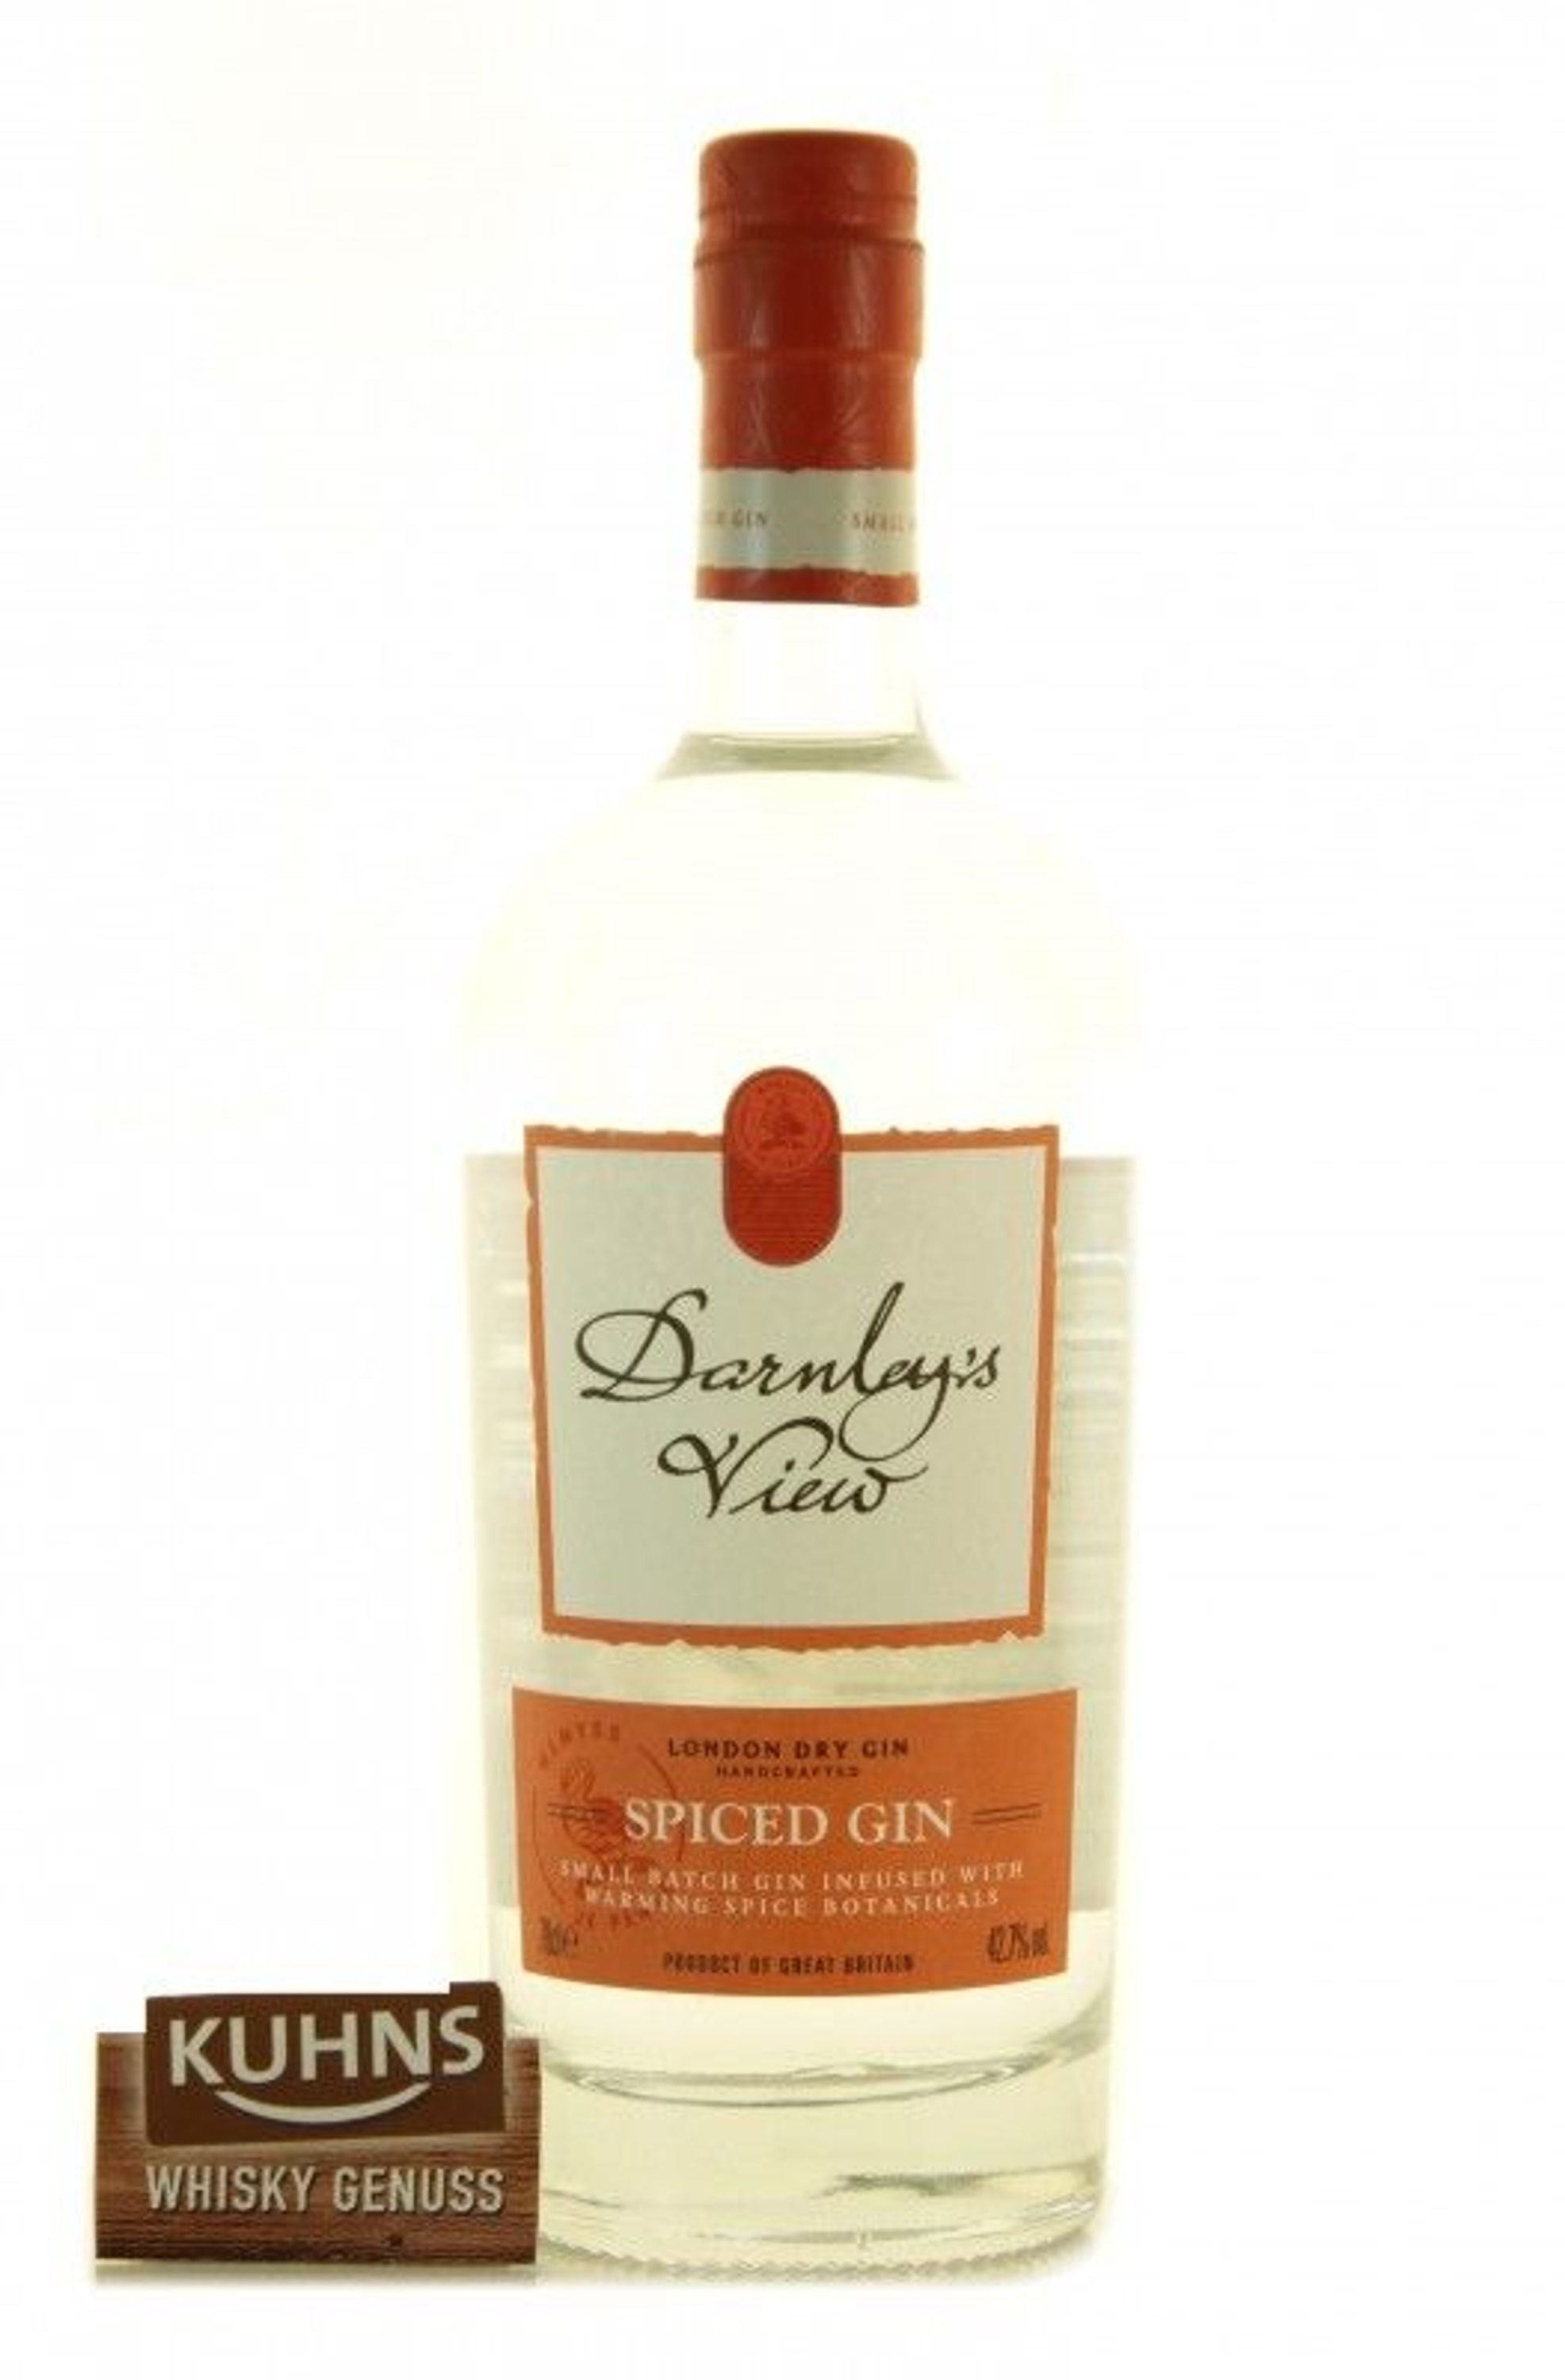 Darnley's View Spiced London Dry Gin 0.7l, alc. 42.7% by volume